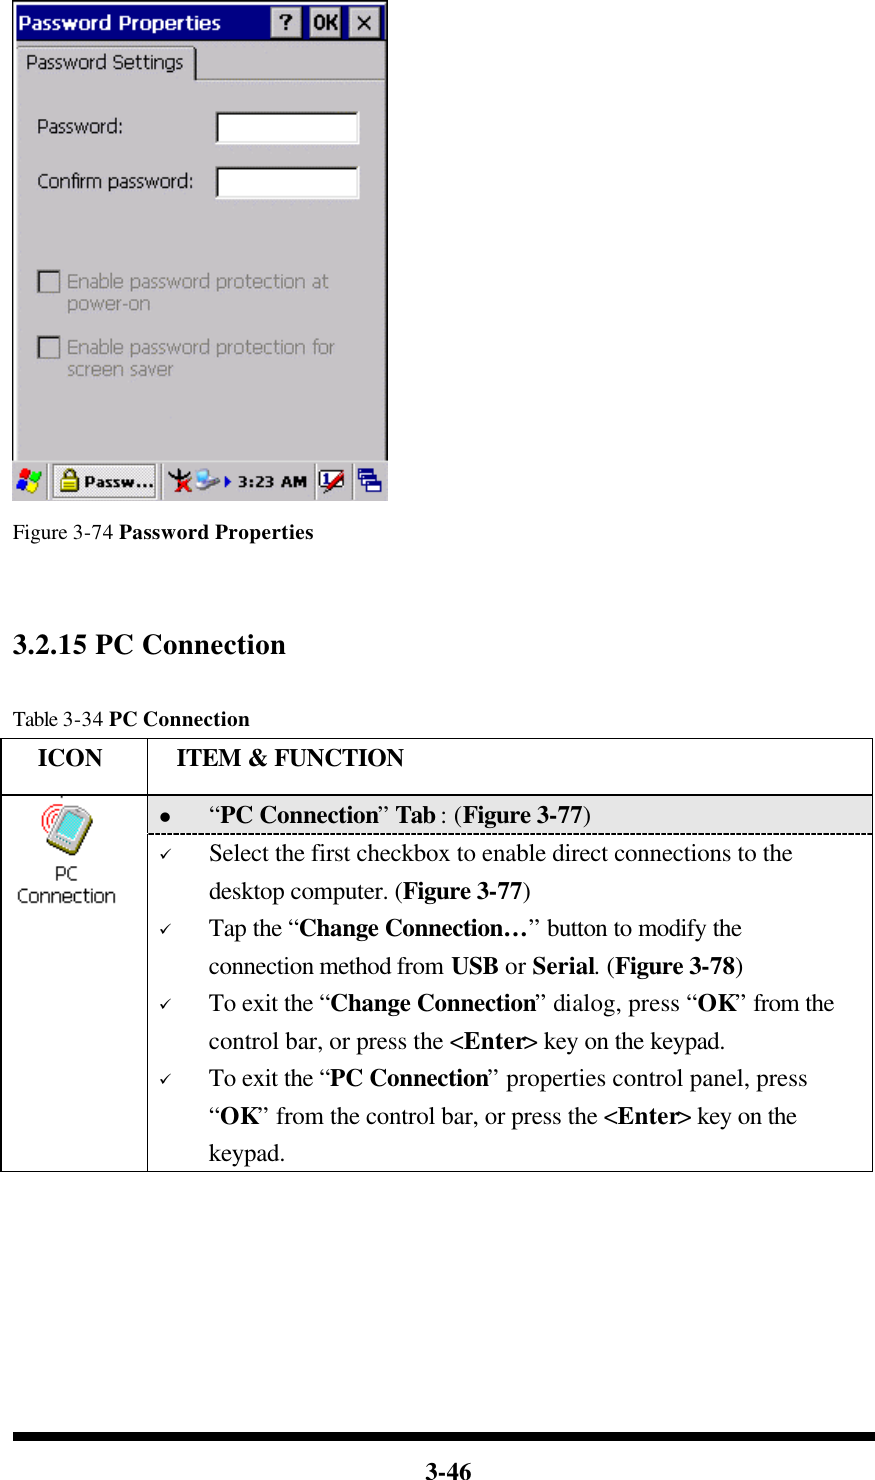  3-46    Figure 3-74 Password Properties   3.2.15 PC Connection    Table 3-34 PC Connection   ICON  ITEM &amp; FUNCTION l “PC Connection” Tab : (Figure 3-77)  ü Select the first checkbox to enable direct connections to the desktop computer. (Figure 3-77) ü Tap the “Change Connection… ” button to modify the connection method from USB or Serial. (Figure 3-78) ü To exit the “Change Connection” dialog, press “OK” from the control bar, or press the &lt;Enter&gt; key on the keypad. ü To exit the “PC Connection” properties control panel, press “OK” from the control bar, or press the &lt;Enter&gt; key on the keypad.  